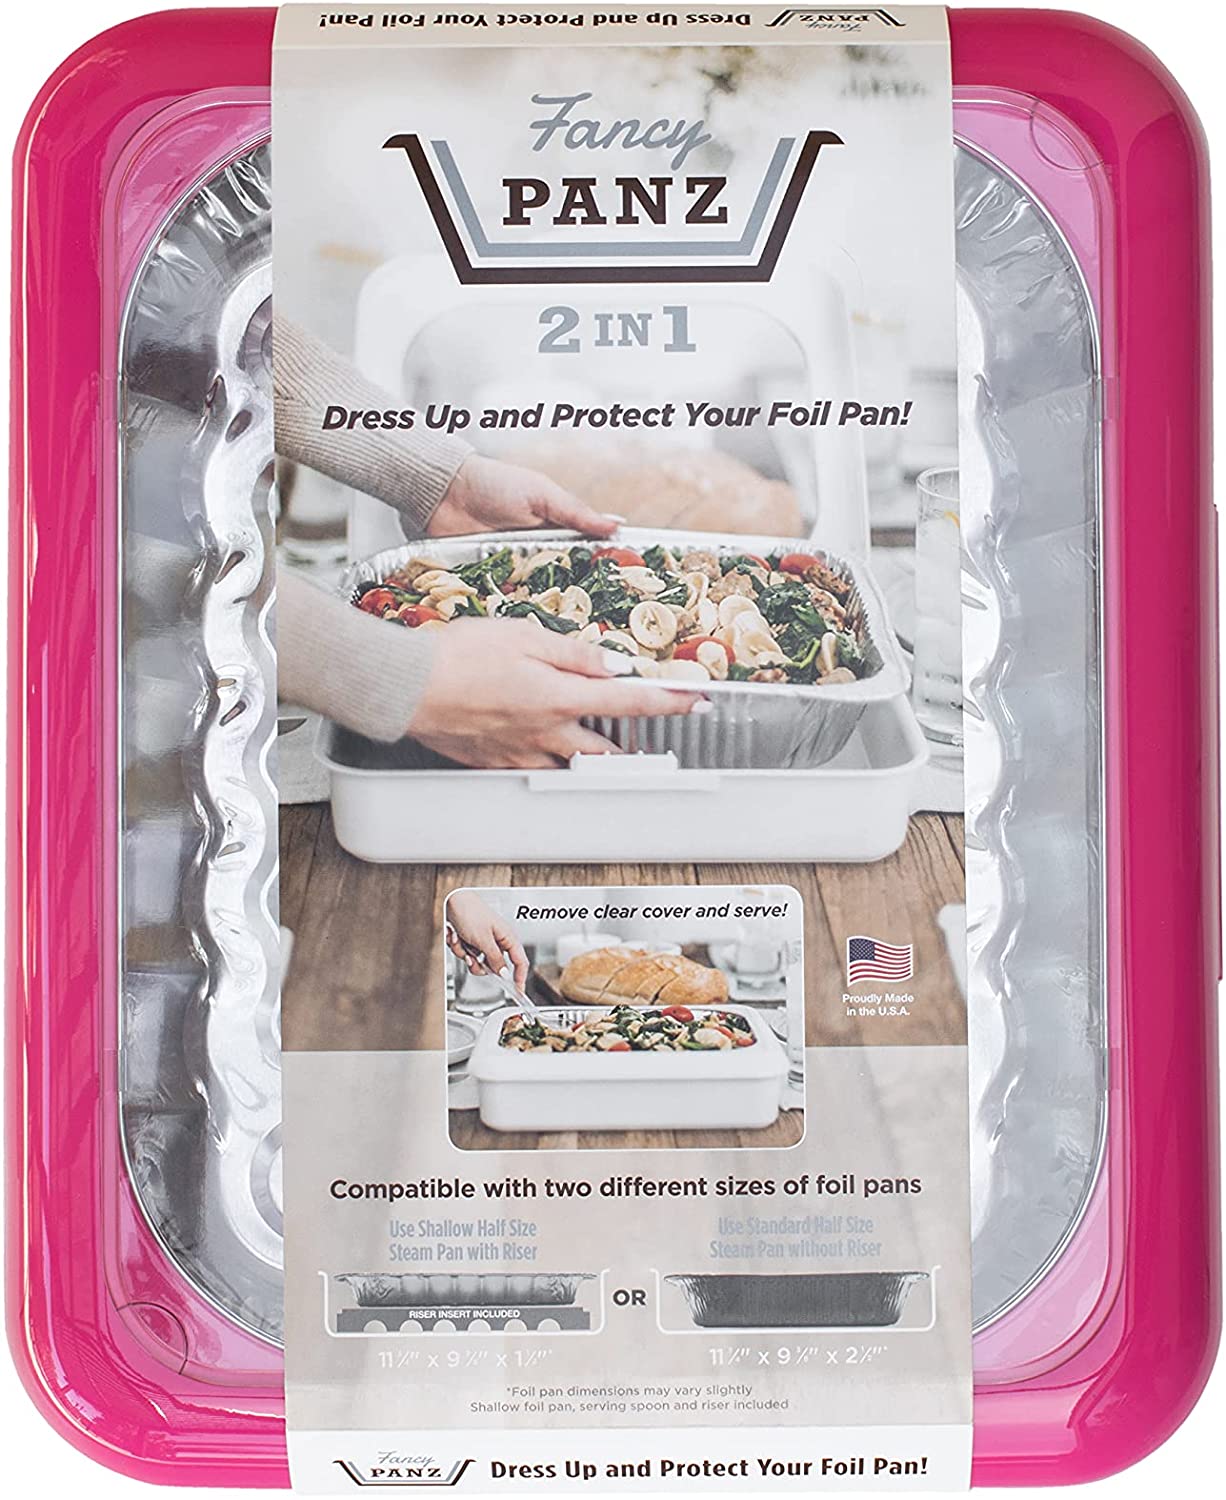 Red Classic Fancy Panz 2 in 1 Casserole Carrier